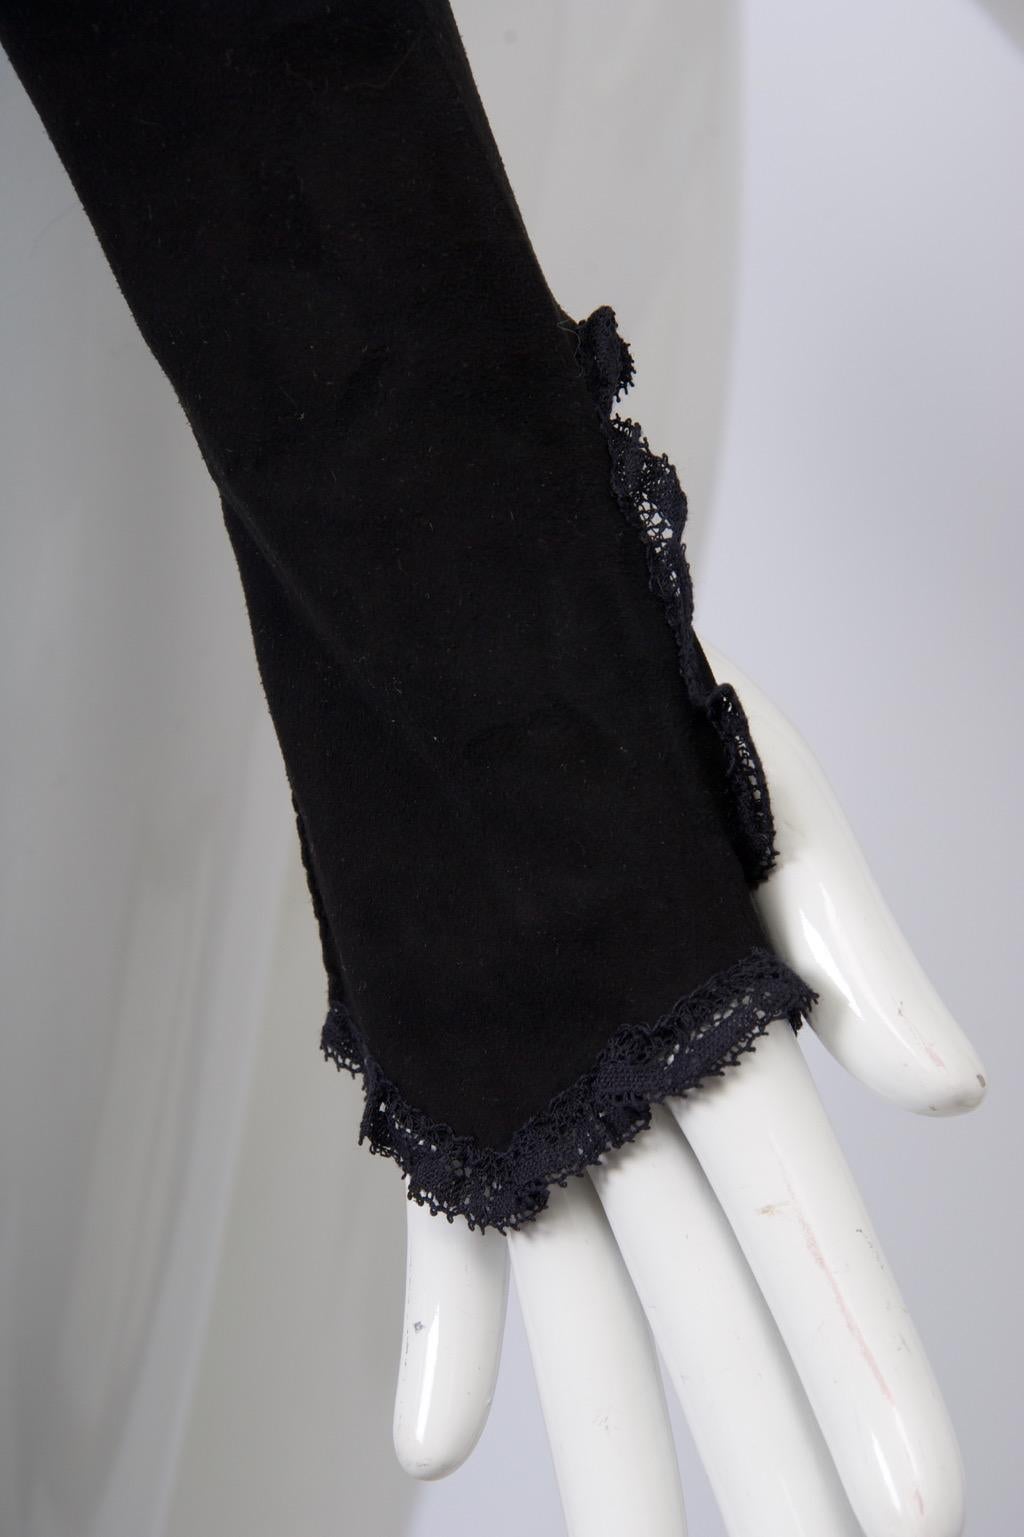 Black suede, fingerless, over-the-elbow gloves are crafted of black suede and trimmed with black lace at all edges. Dramatic and unique.
Trude Schoeman was a well-known designer for Dawnelle Gloves from the 1940s-'60s, when gloves were an essential